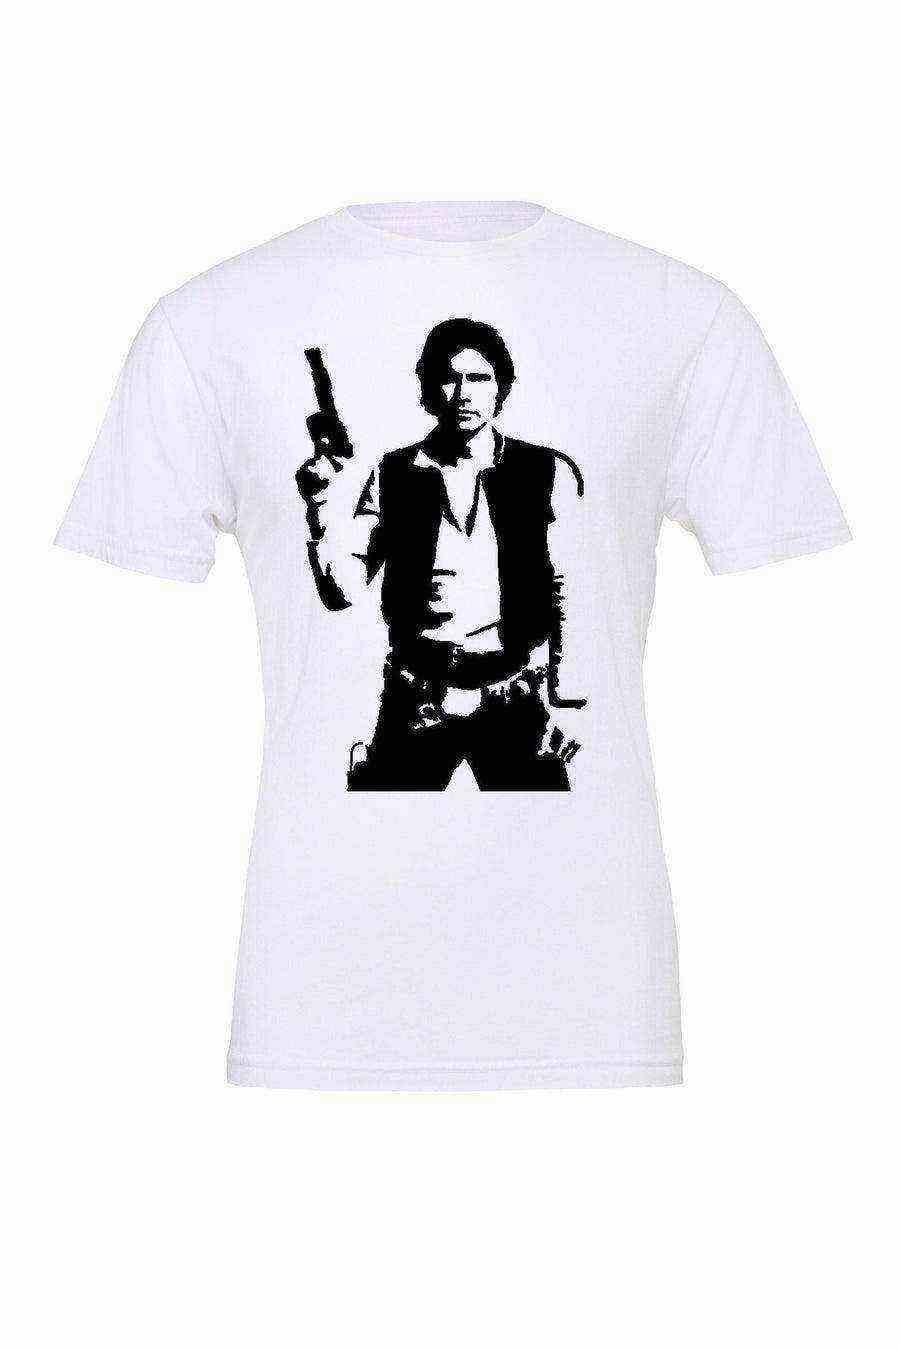 Youth | Han Solo Tee - Dylan's Tees